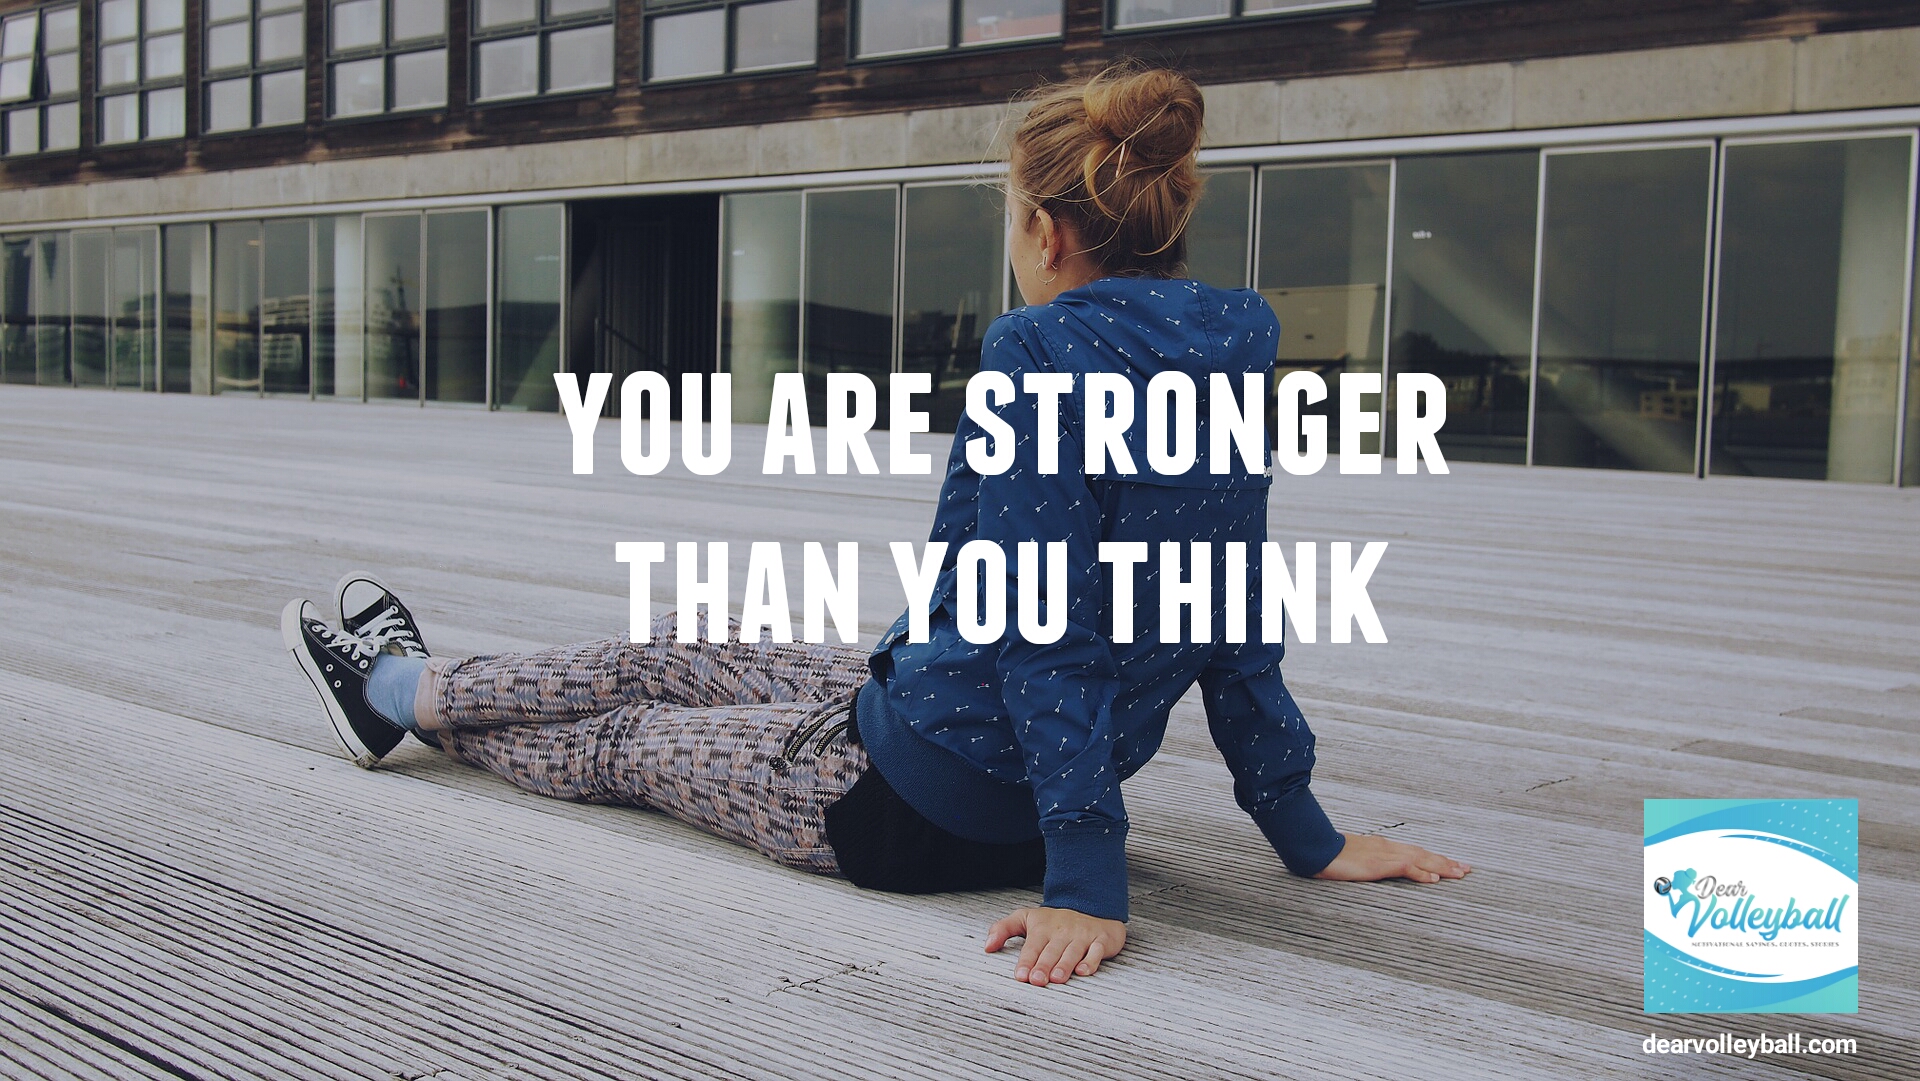 You are stronger than you think and 54 short inspirational quotes on DearVolleyball.com